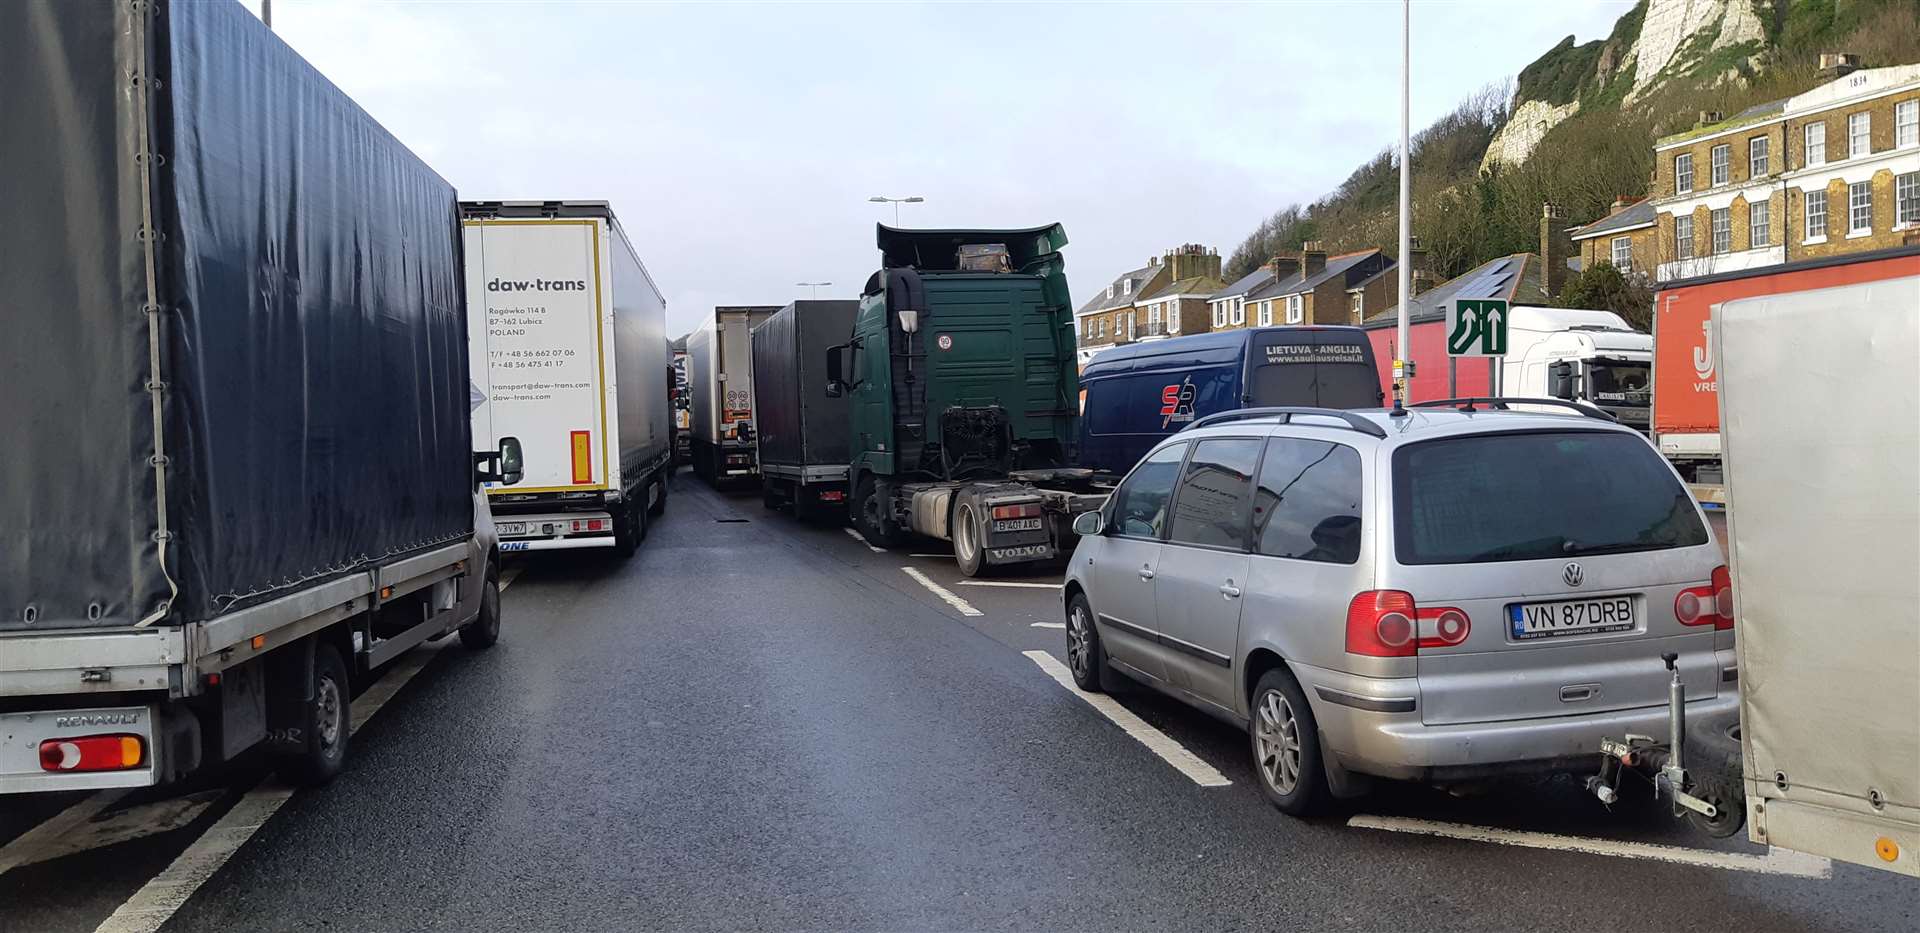 Cross-Channel vehicles at a standstill in Dover, December 22, 2020